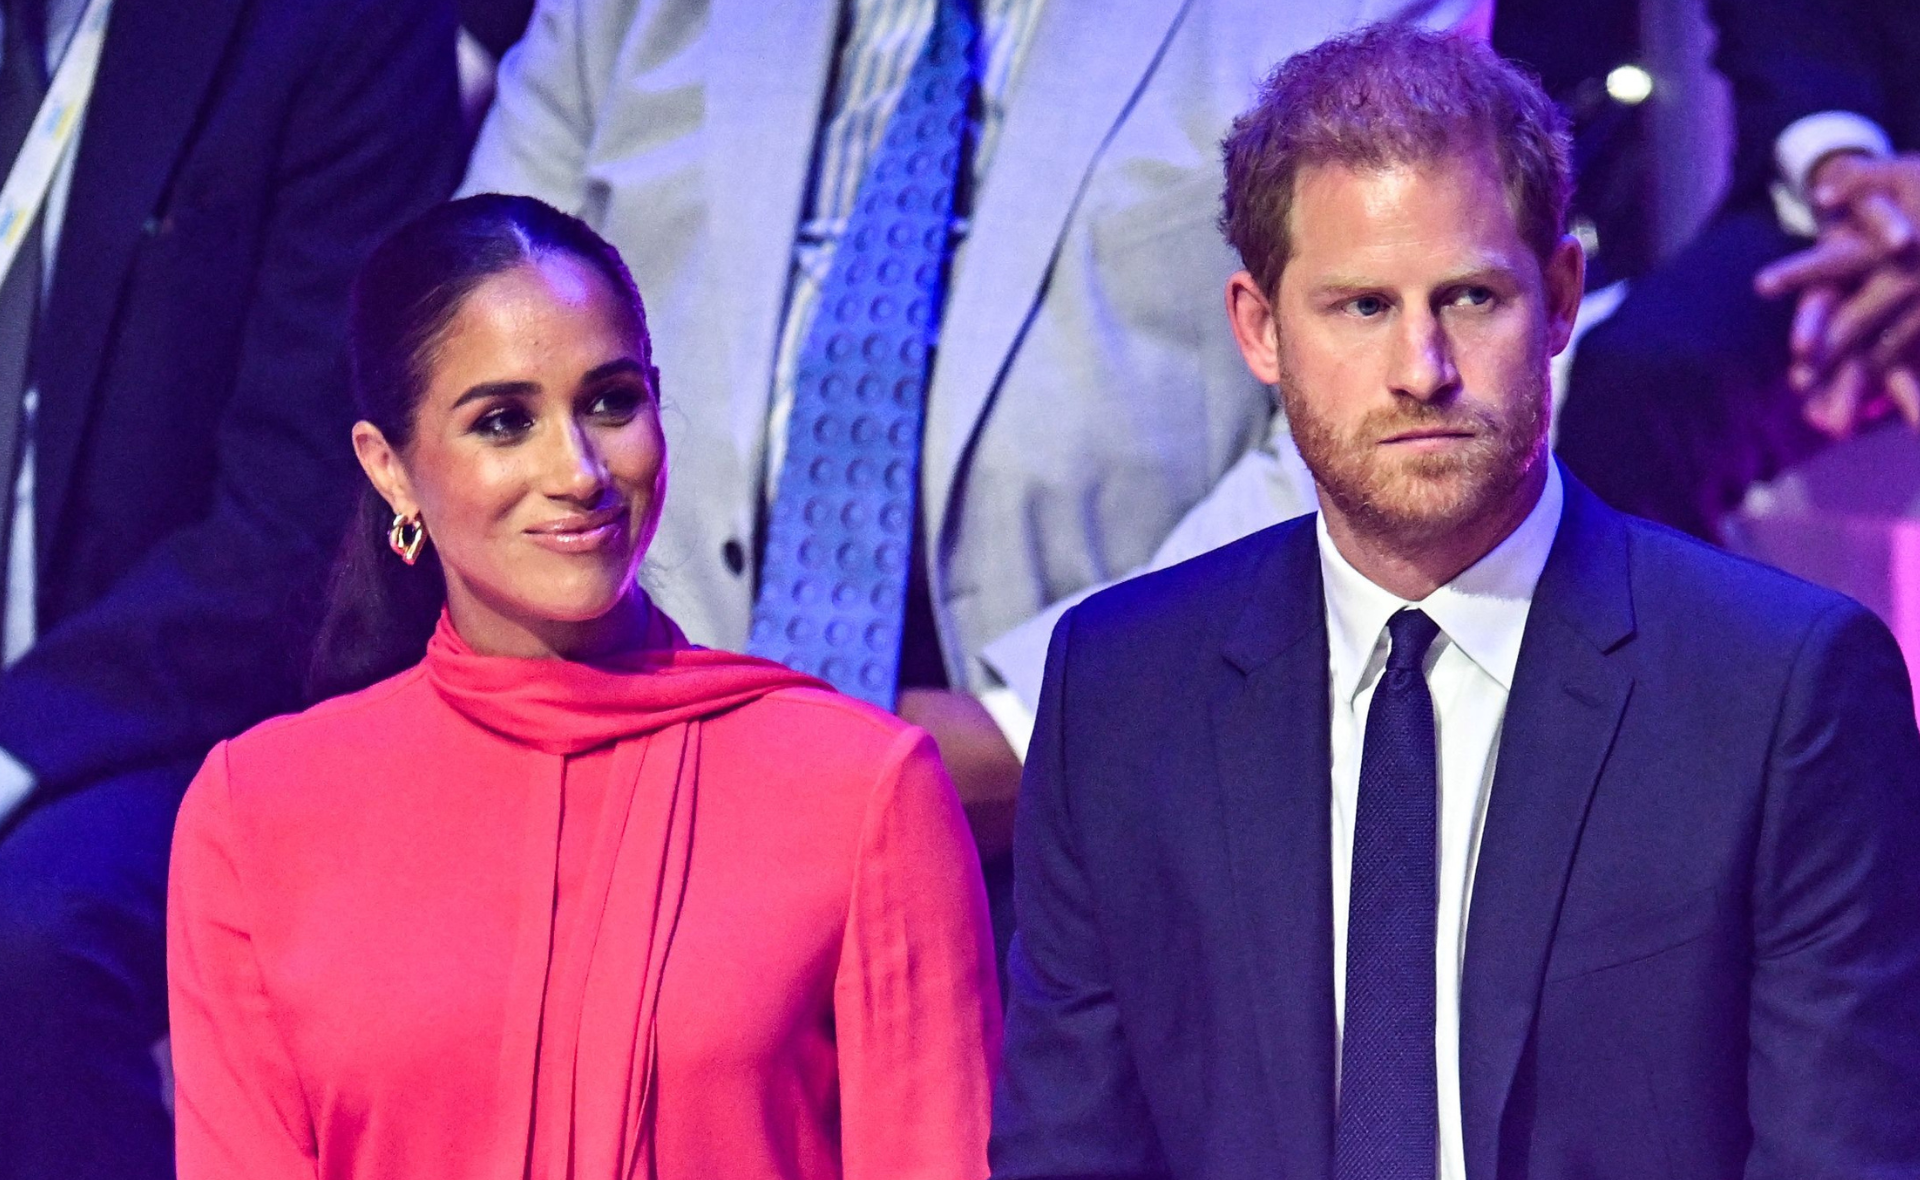 Prince Harry and Meghan Markle announce the cancellation of their Spotify exclusive podcast